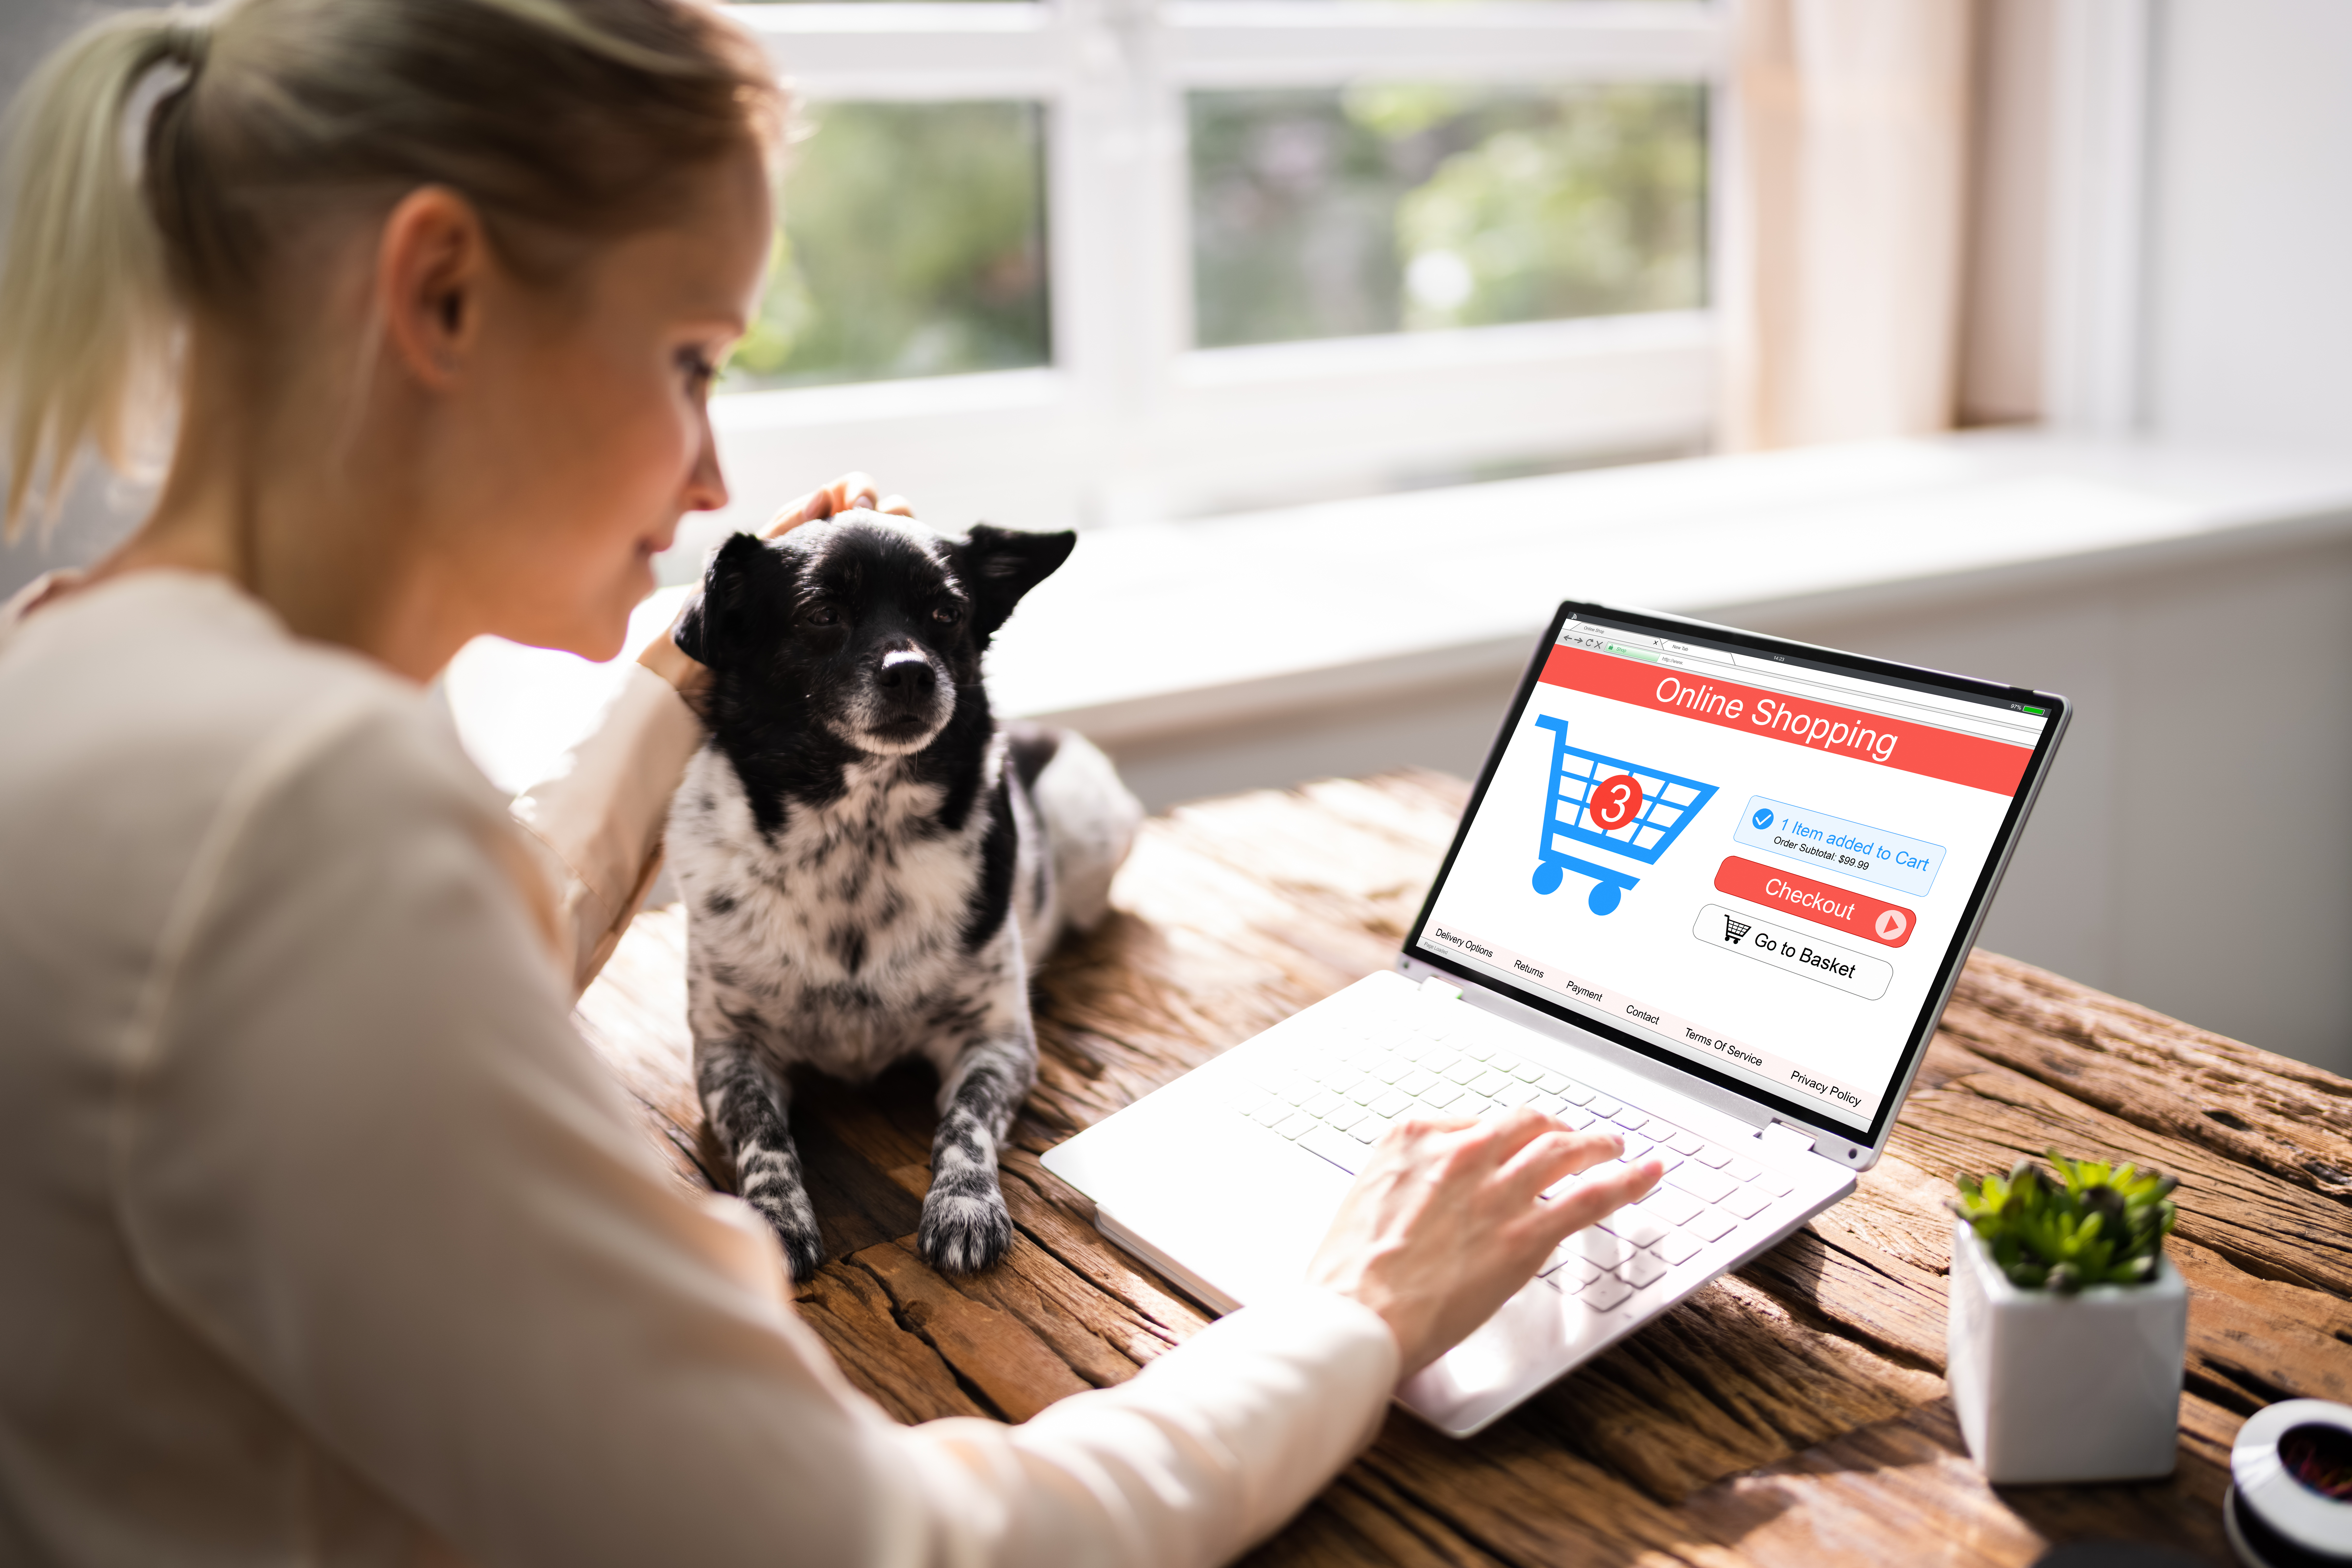 Woman shopping online while petting her dog